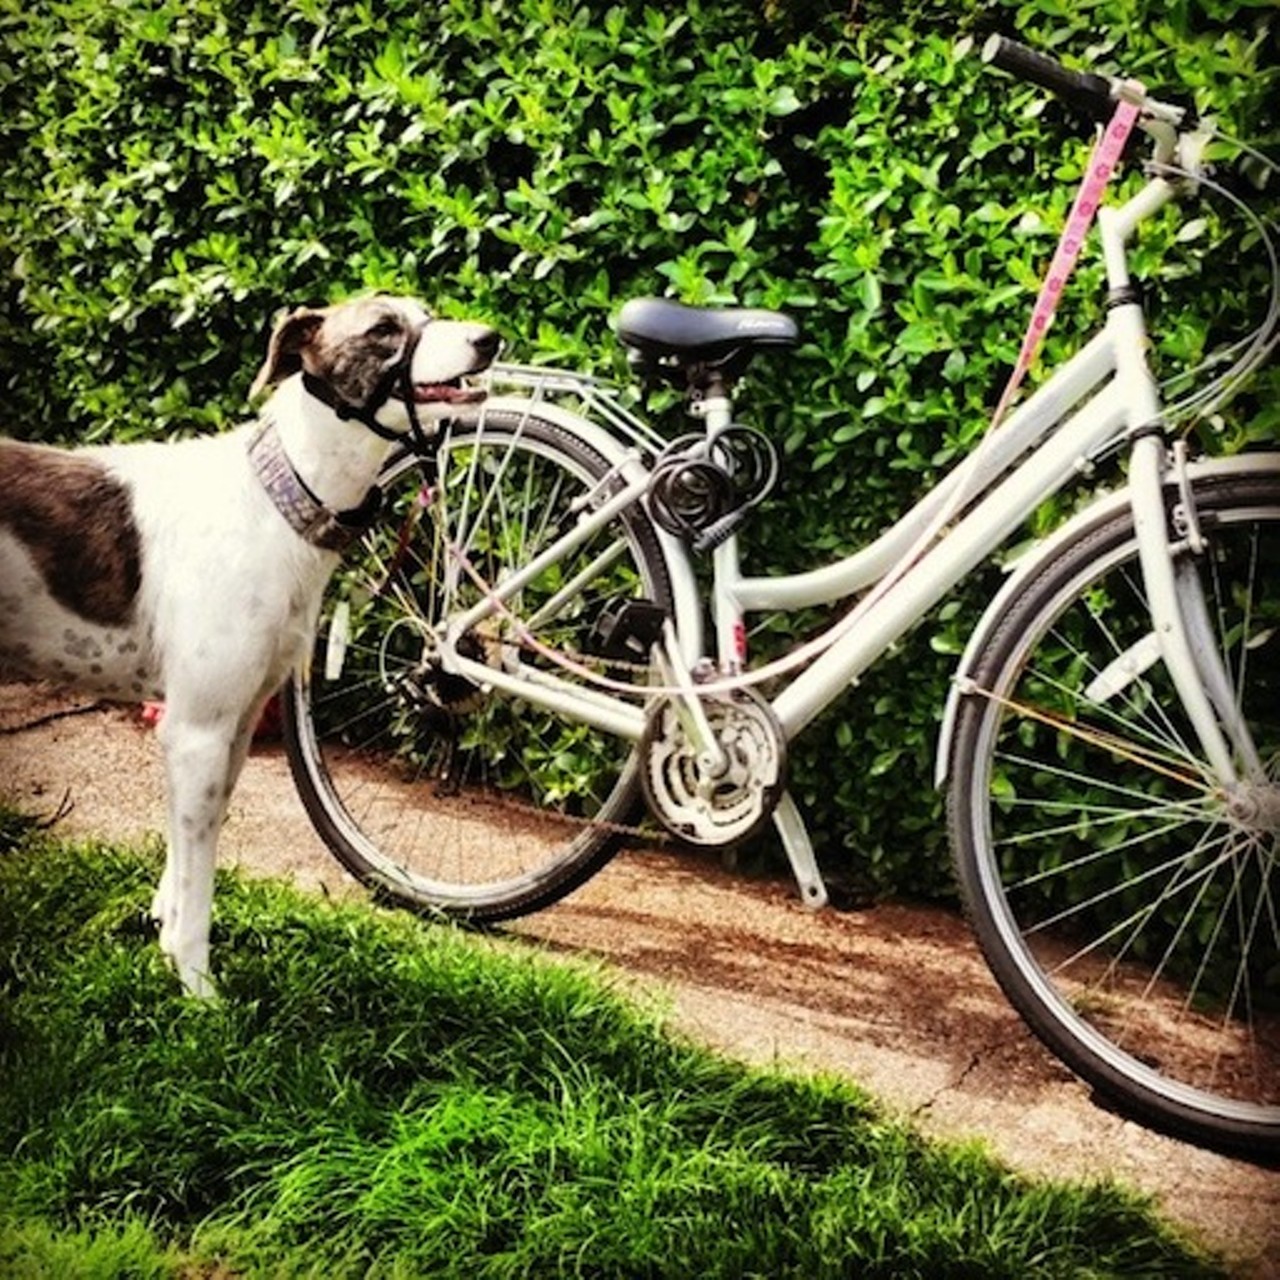 Head out for a relaxing bike ride, canine companion by your side, through Lakewood's historic neighborhoods. There are plenty of harnesses and bike attachments available to ensure your dog doesn't topple you over in hot pursuit of a squirrel.